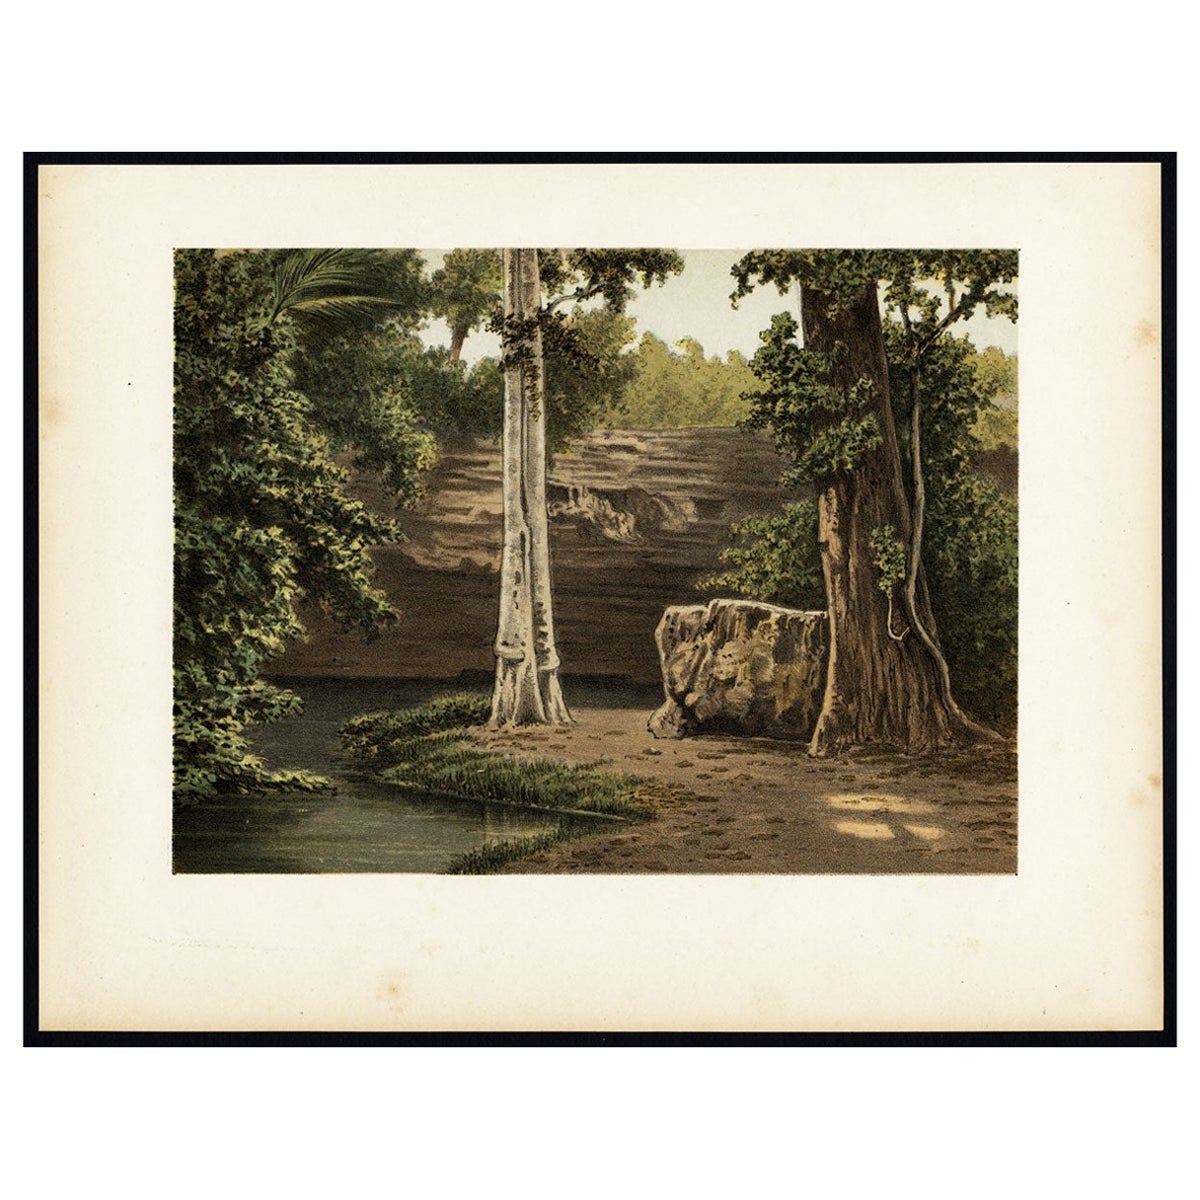 Antique Print of the Djati Forest or Teak Forest, Indonesia, 1888